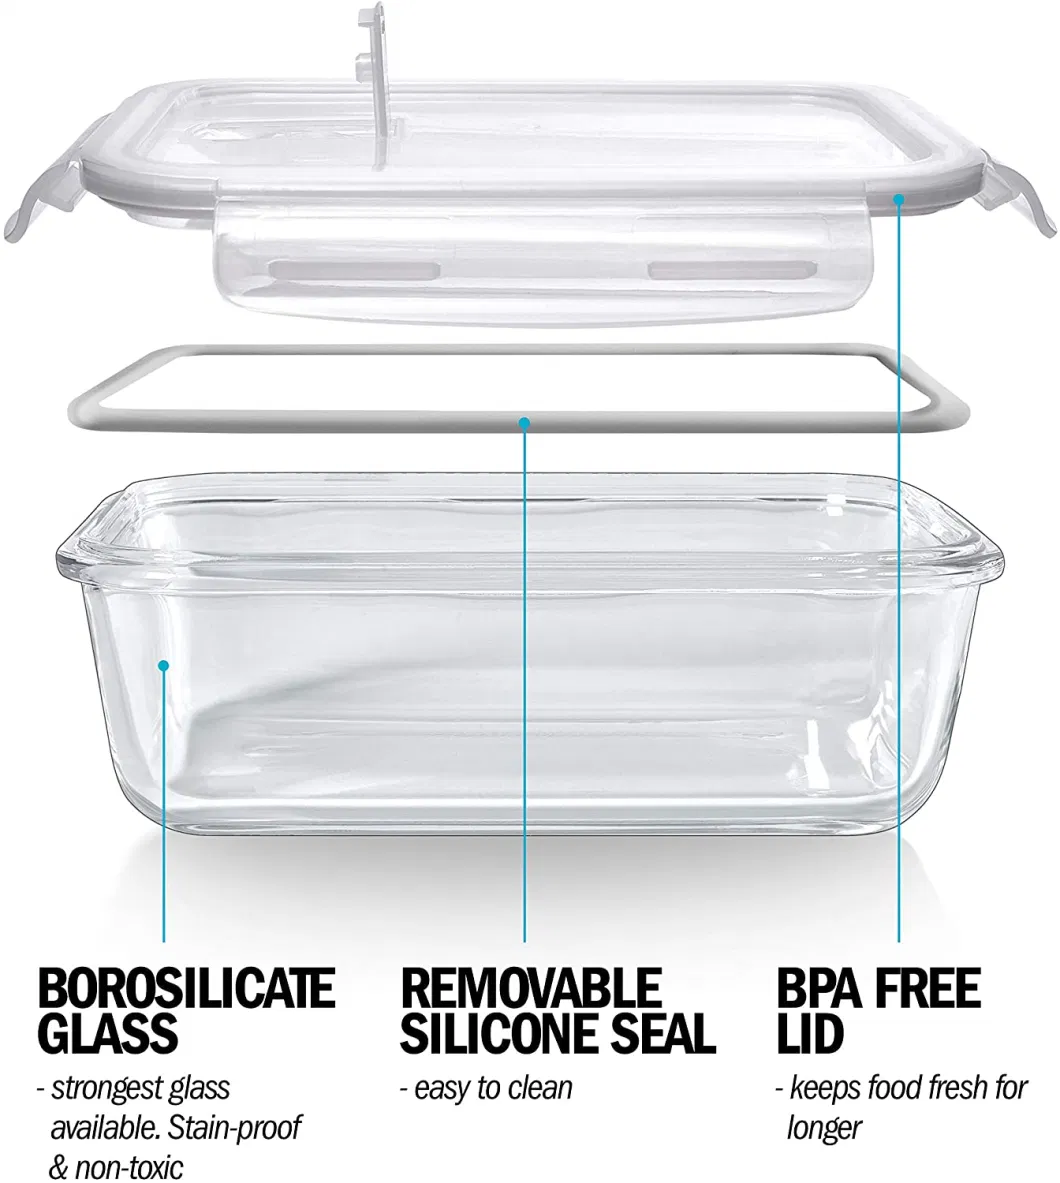 BPA Free Airtight Glass Food Storage Containers, Glass Meal Prep Containers, Glass Lunch Bento Boxes with Bamboo or PP Lids